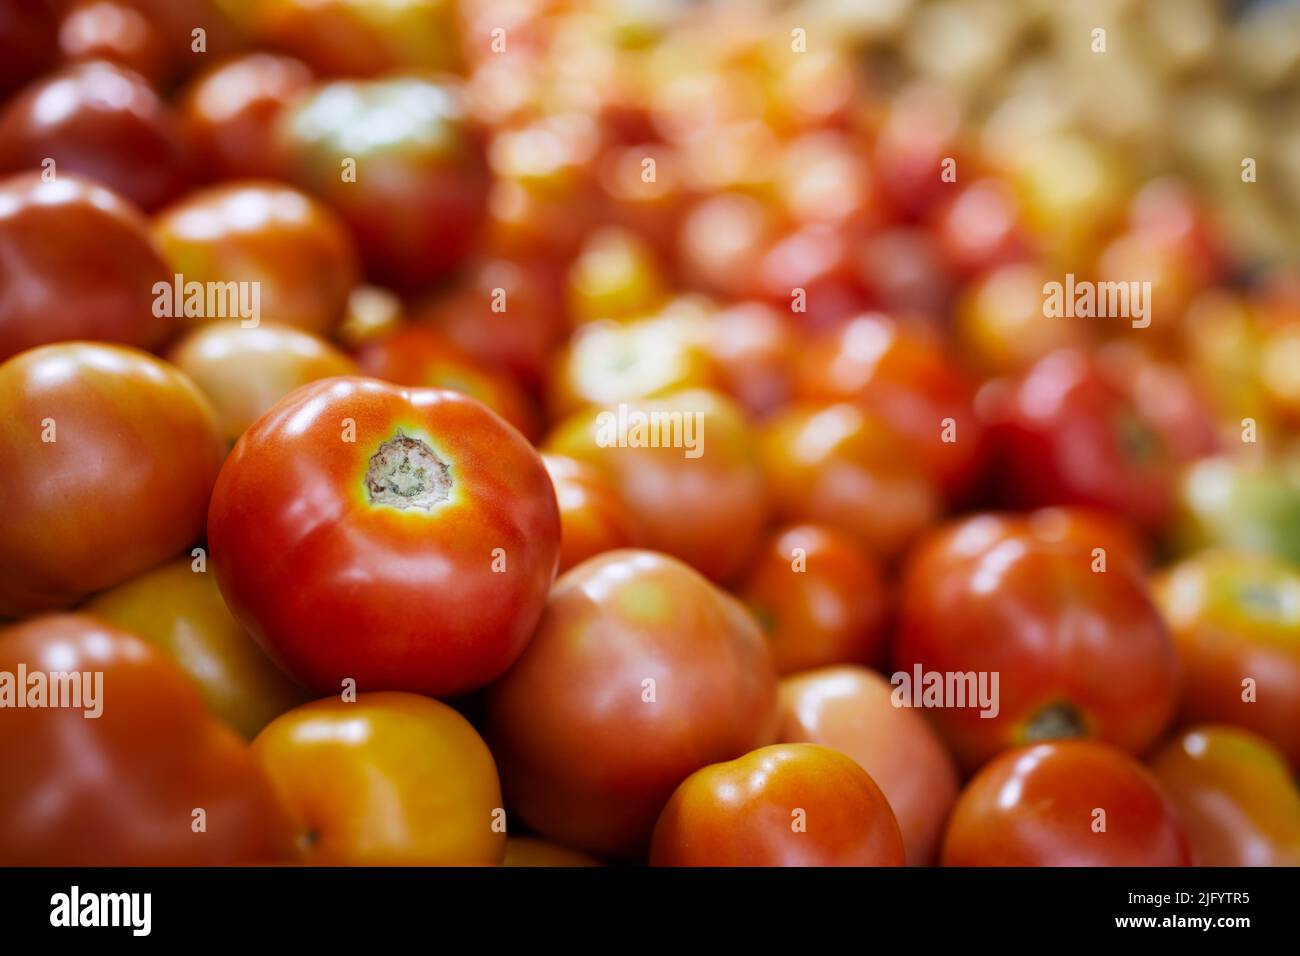 Selective focus on red tomato. Sale of fresh raw vegetable in market stall. Stock Photo